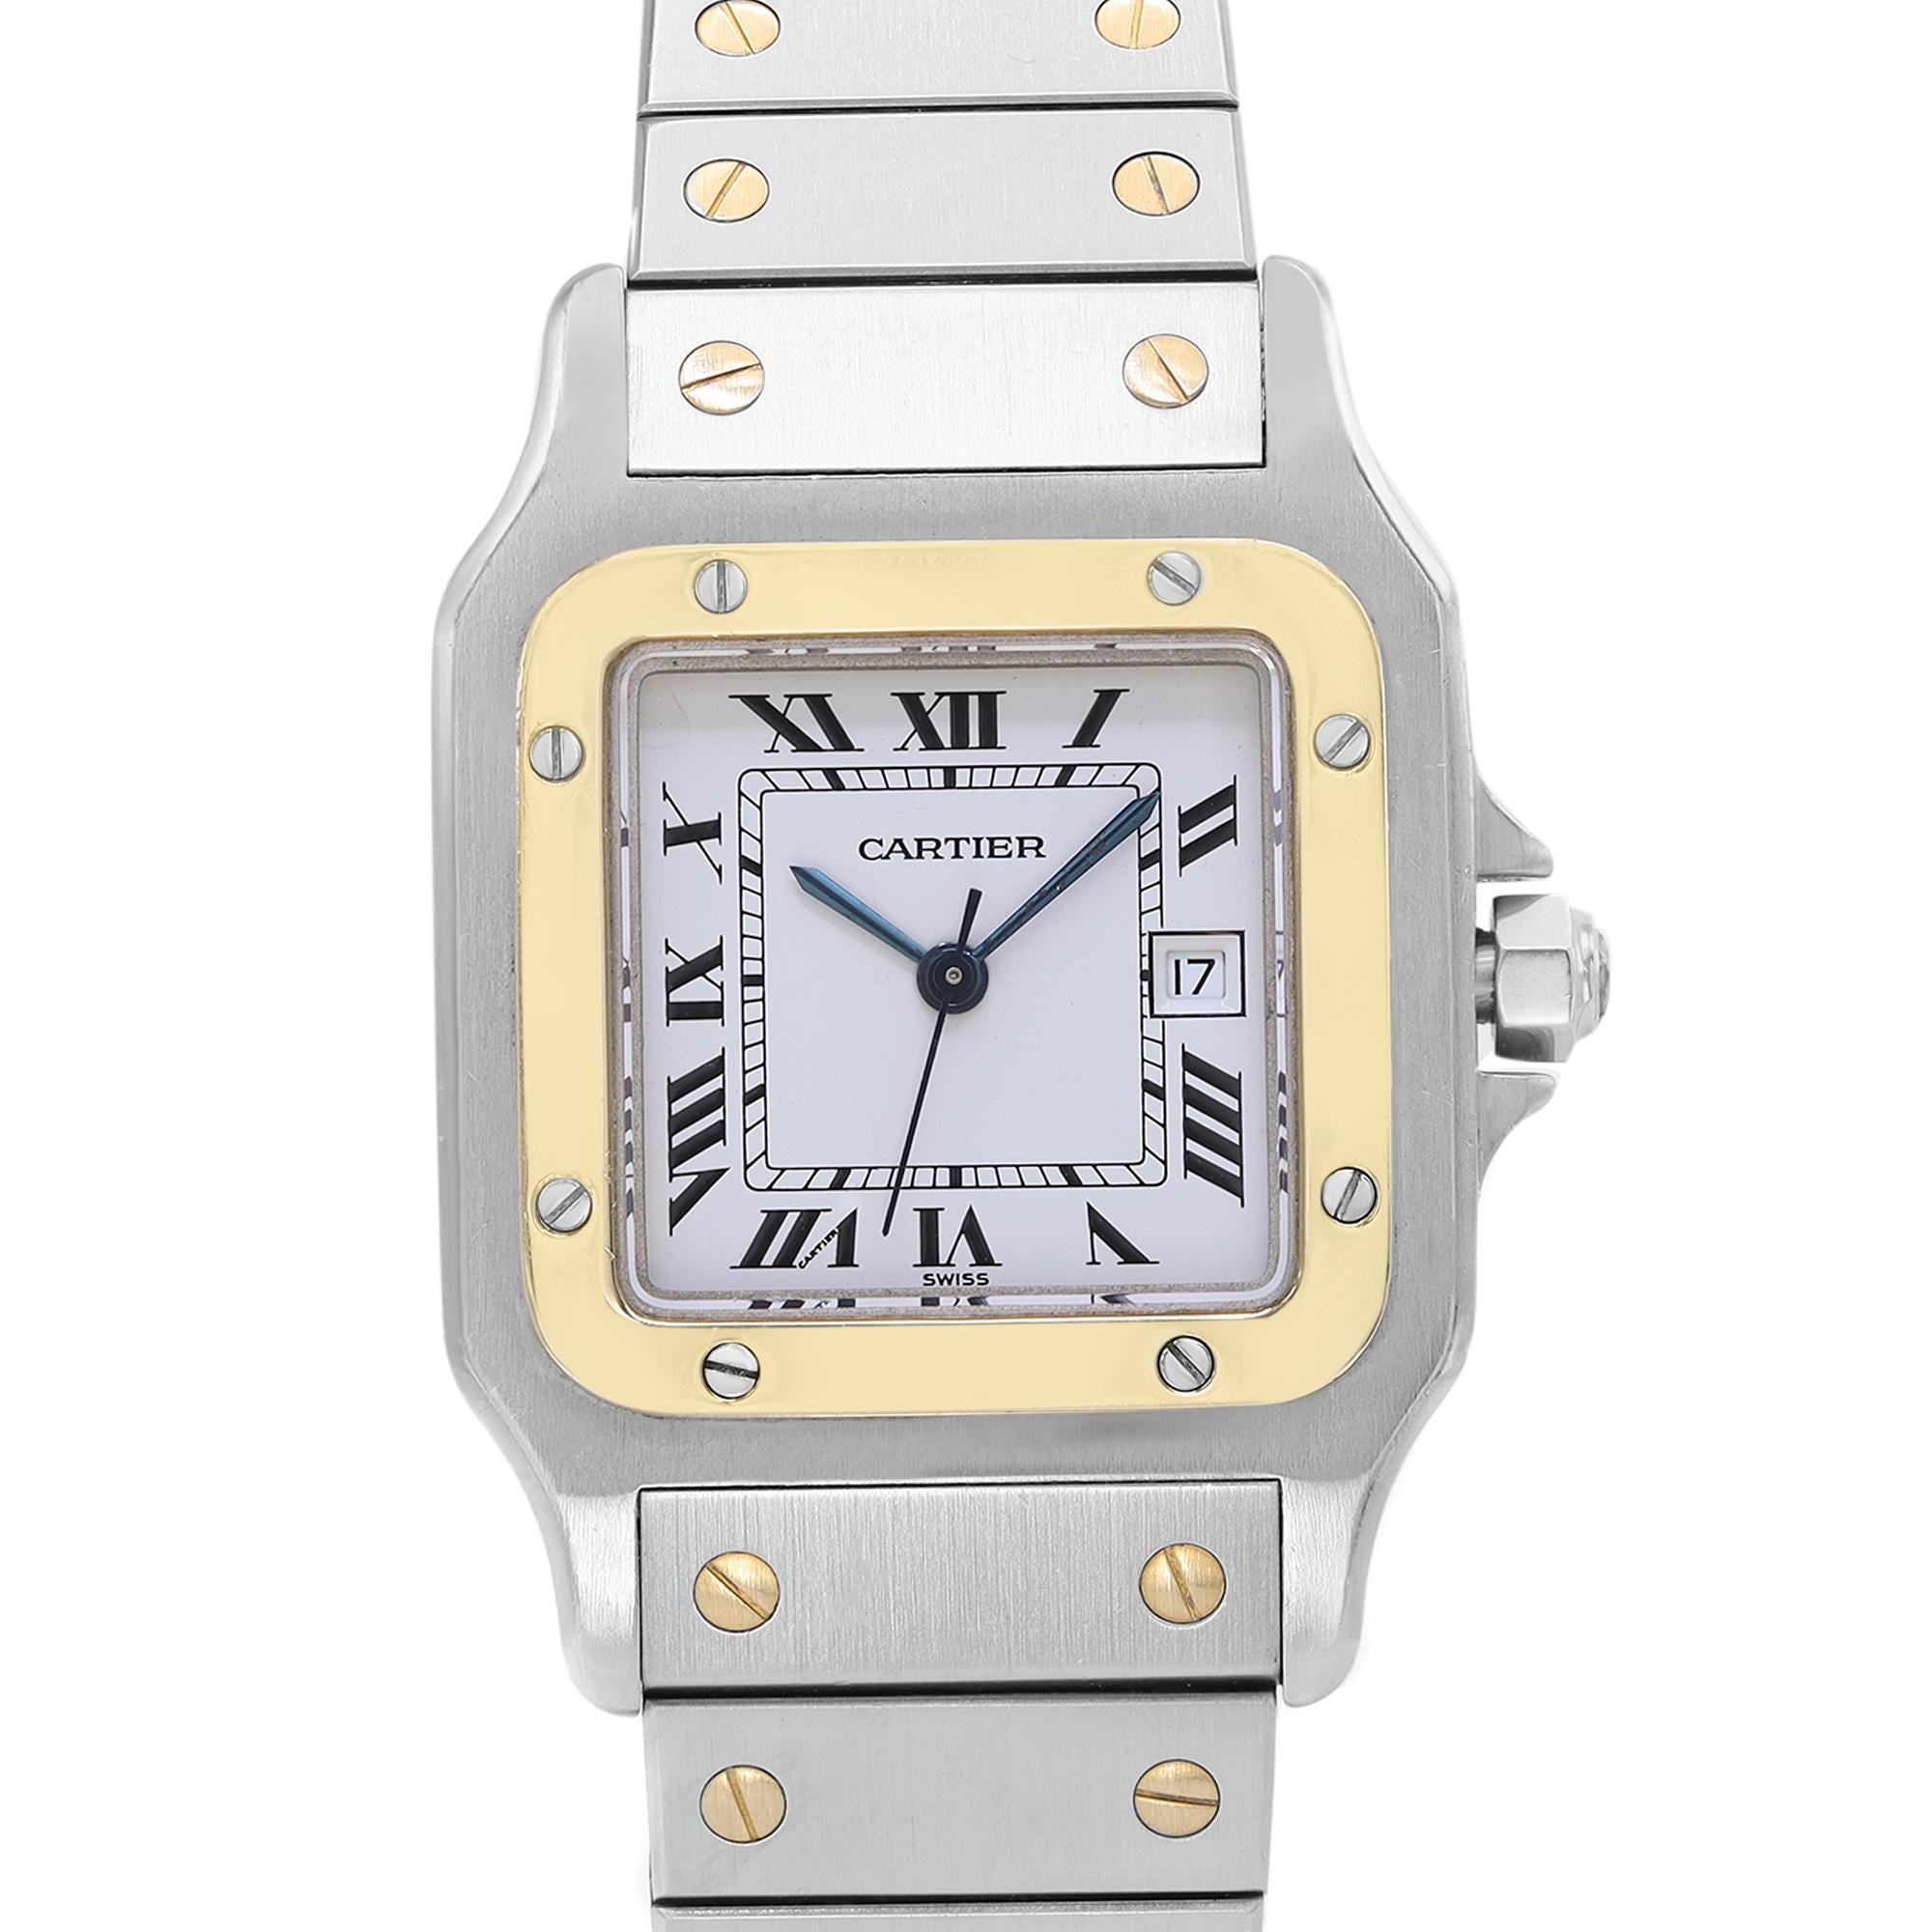 Pre-owned Cartier Santos Galbee 29mm Steel 18k Gold White dial Automatic Unisex Watch 2961. This Beautiful Timepiece is Powered by mechanical (automatic) Movement And Features: Stainless Steel Case with a Stainless Steel Bracelet with 2 Gold